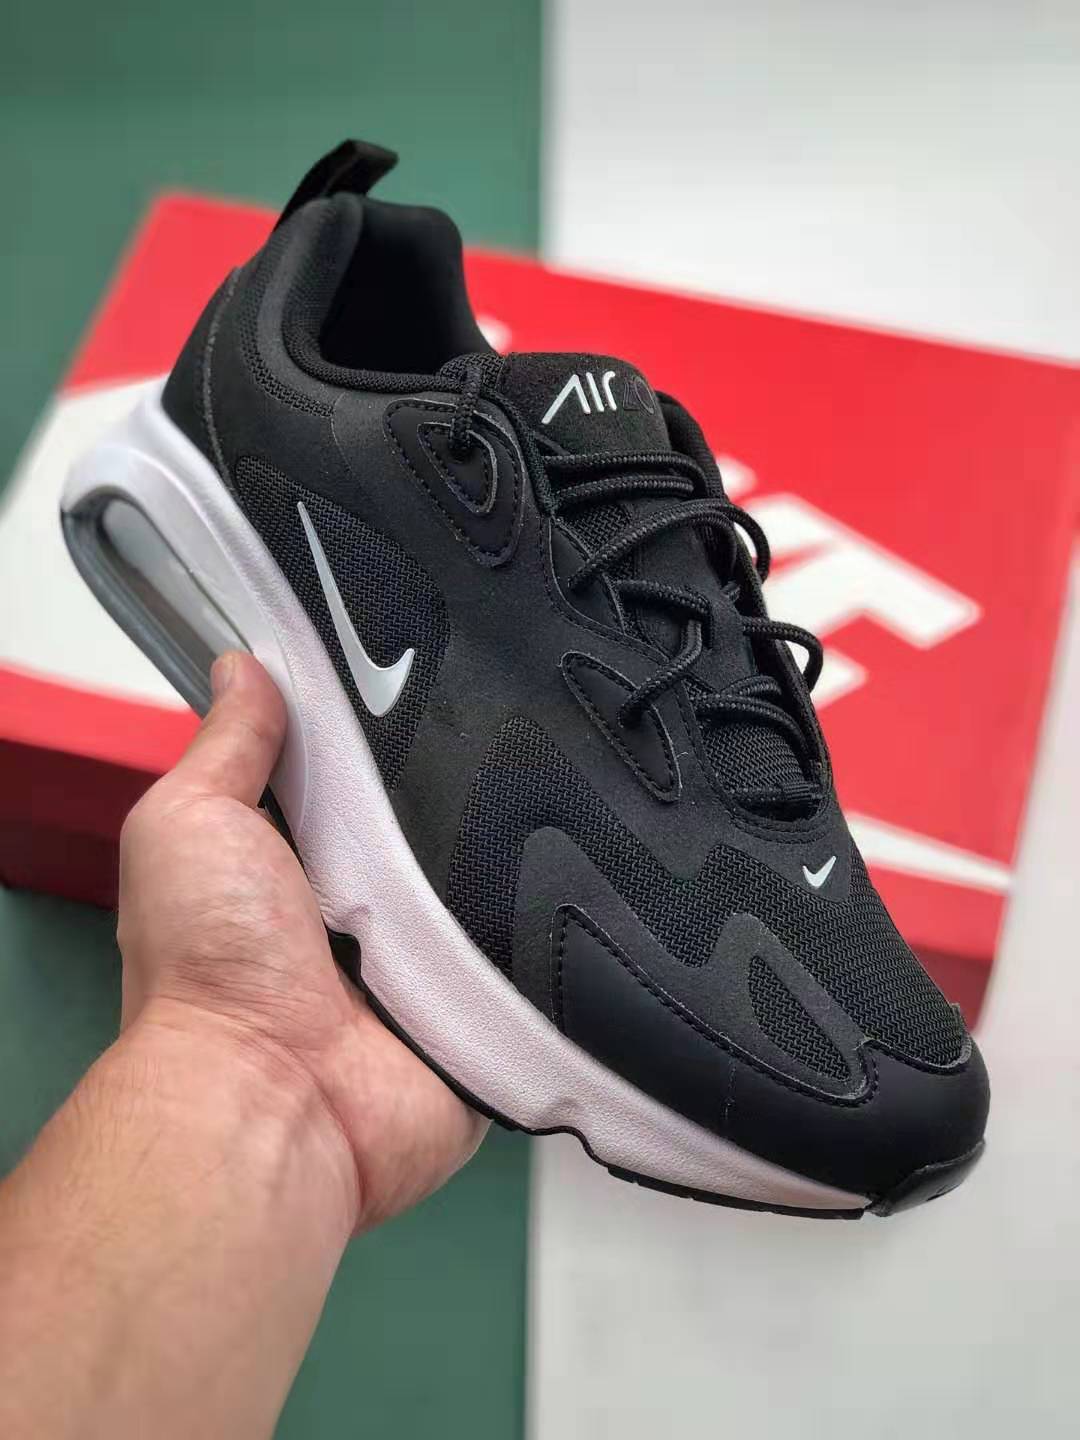 Nike Air Max 200 'Black' CI3865-001 | Lightweight Comfort and Style